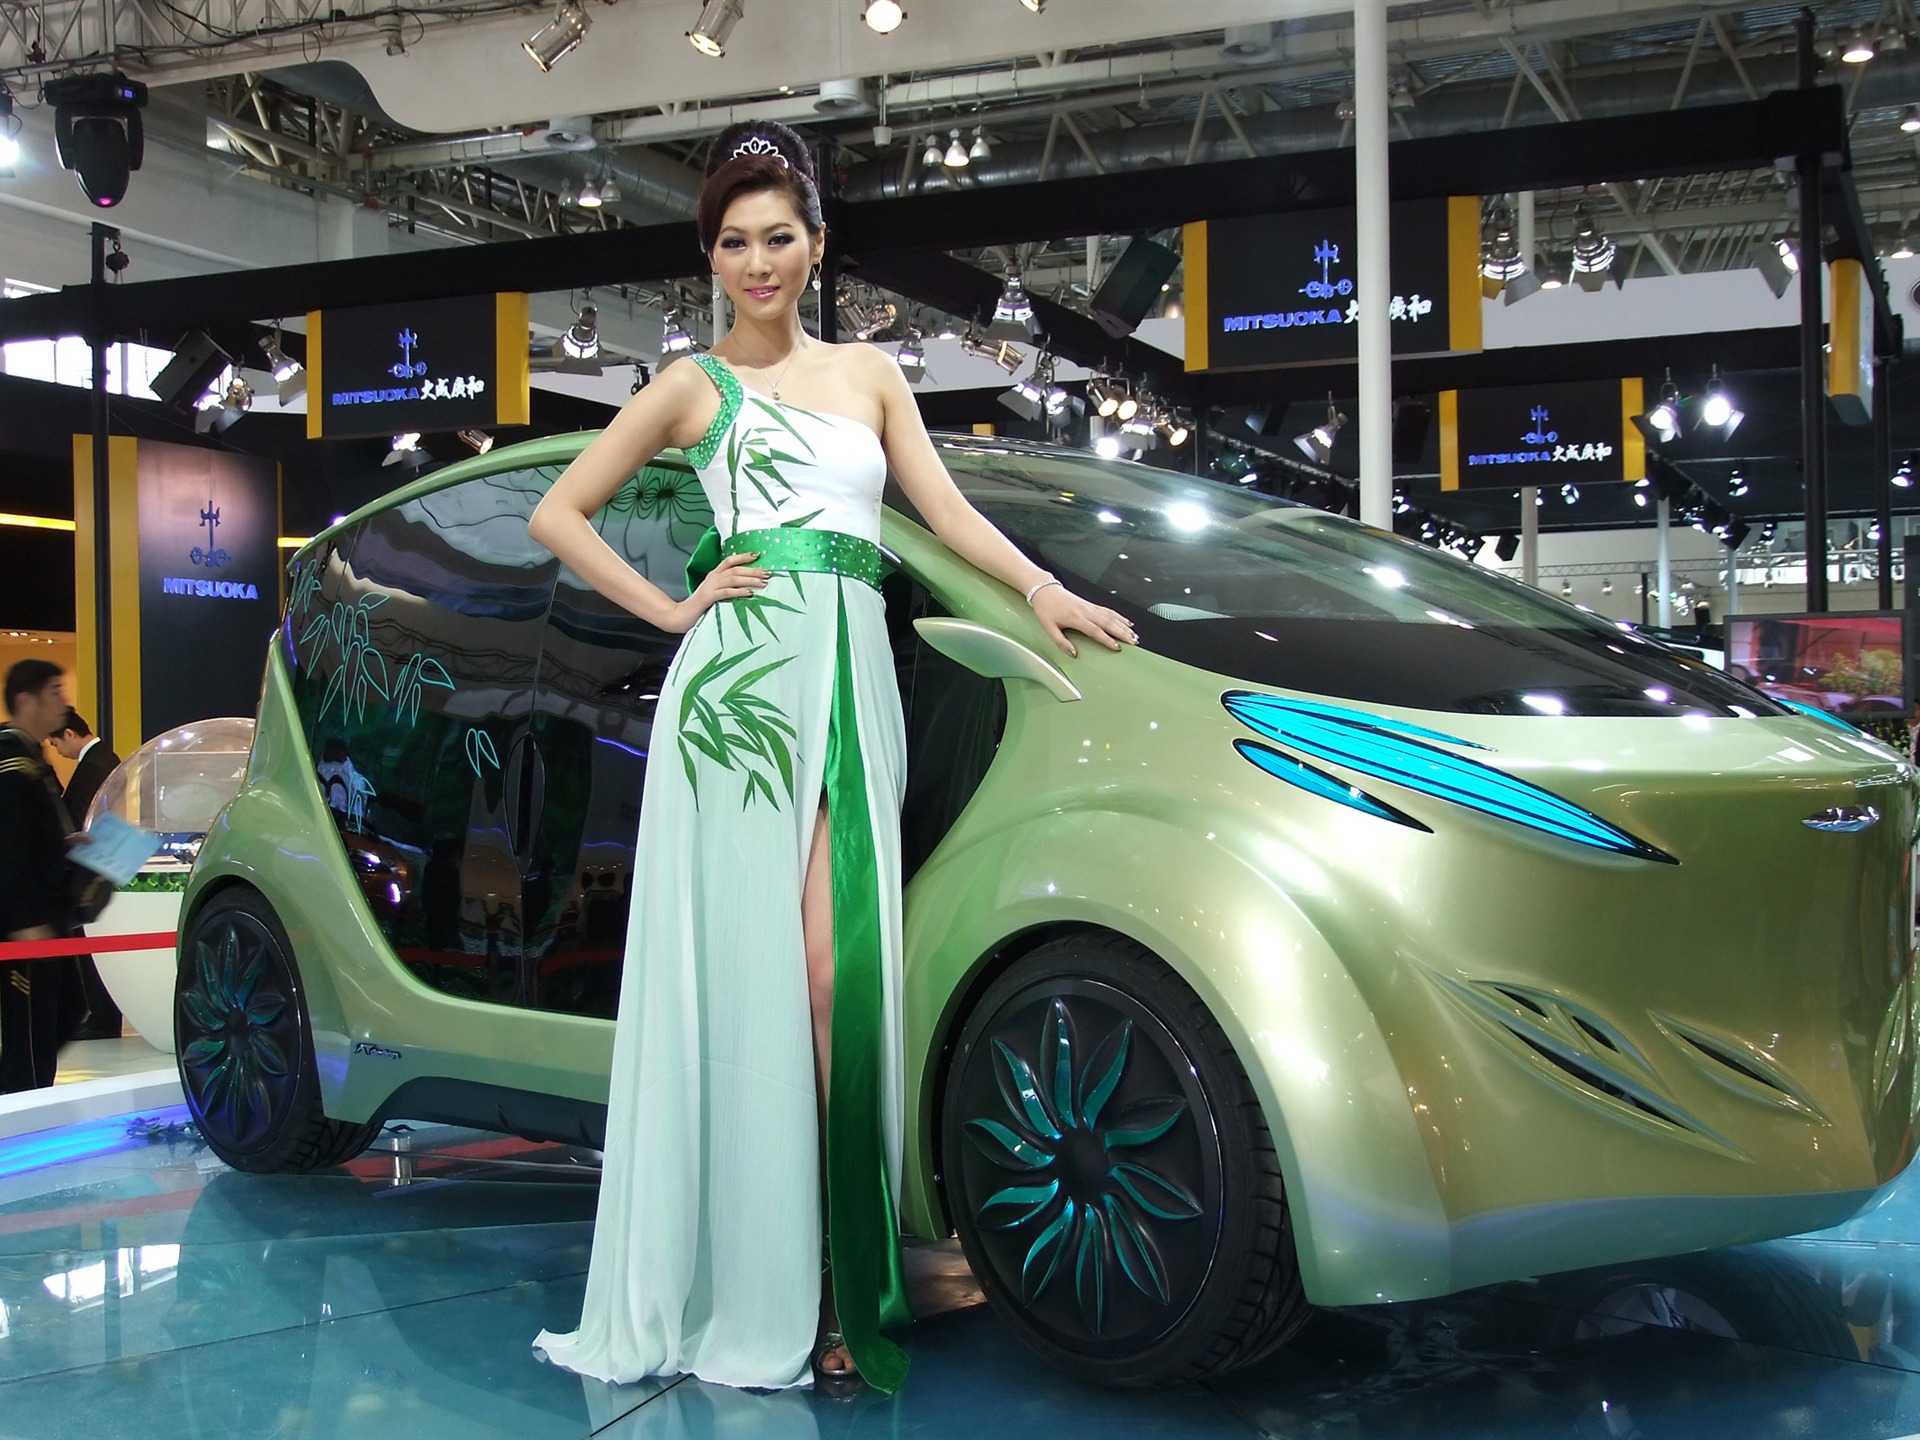 2010 Beijing Auto Show car models Collection (2) #2 - 1920x1440